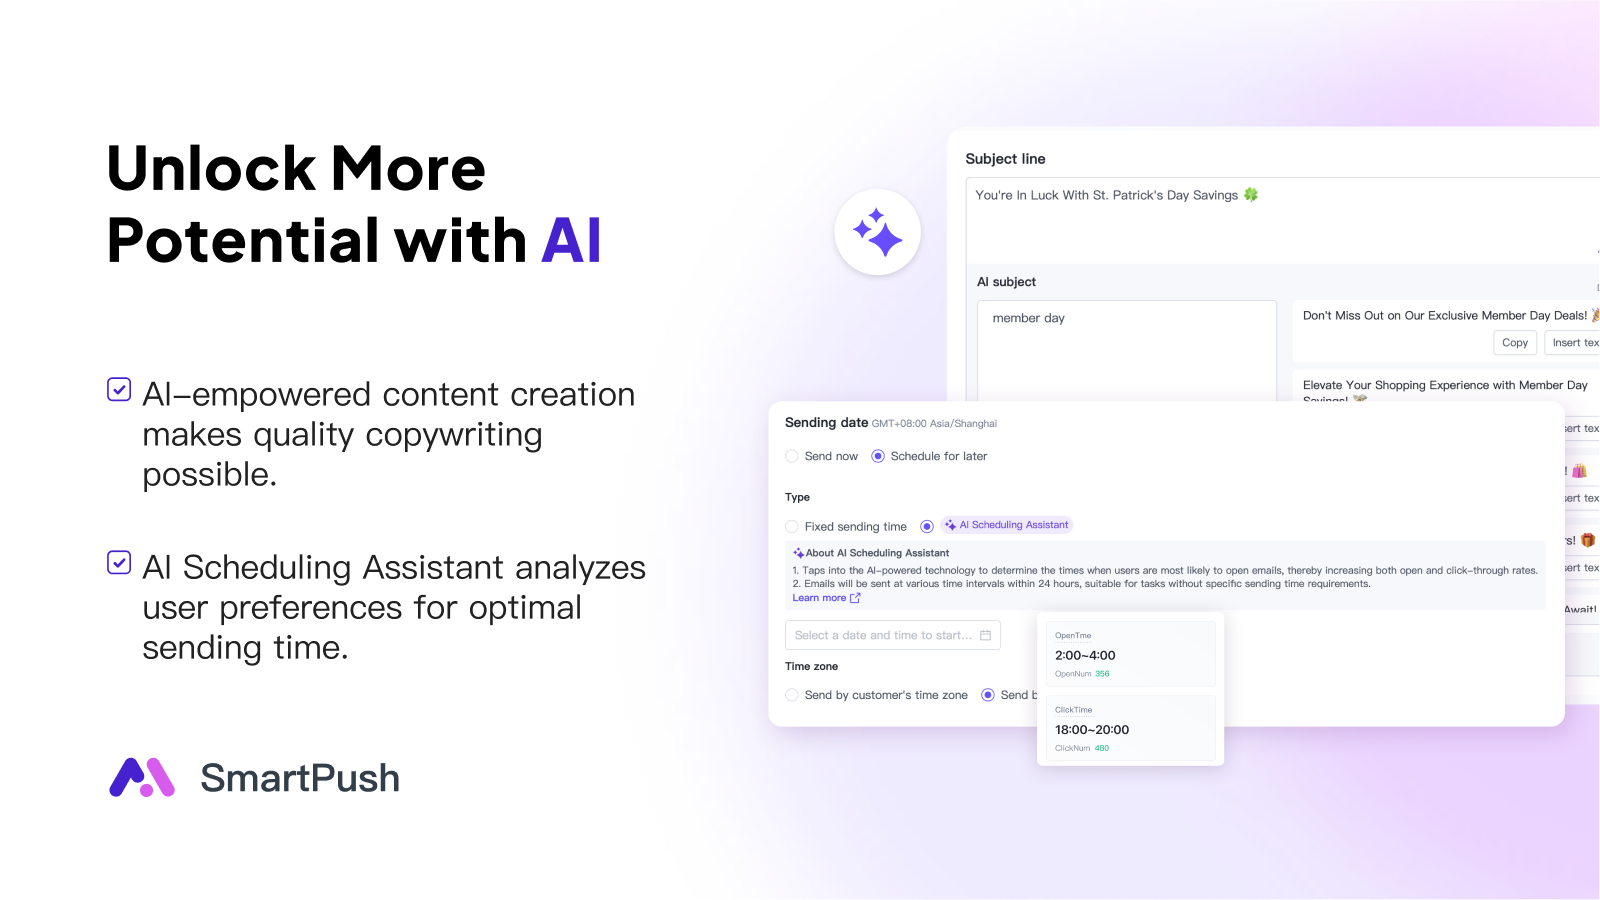 AI-empowered content creation makes quality copywriting possible